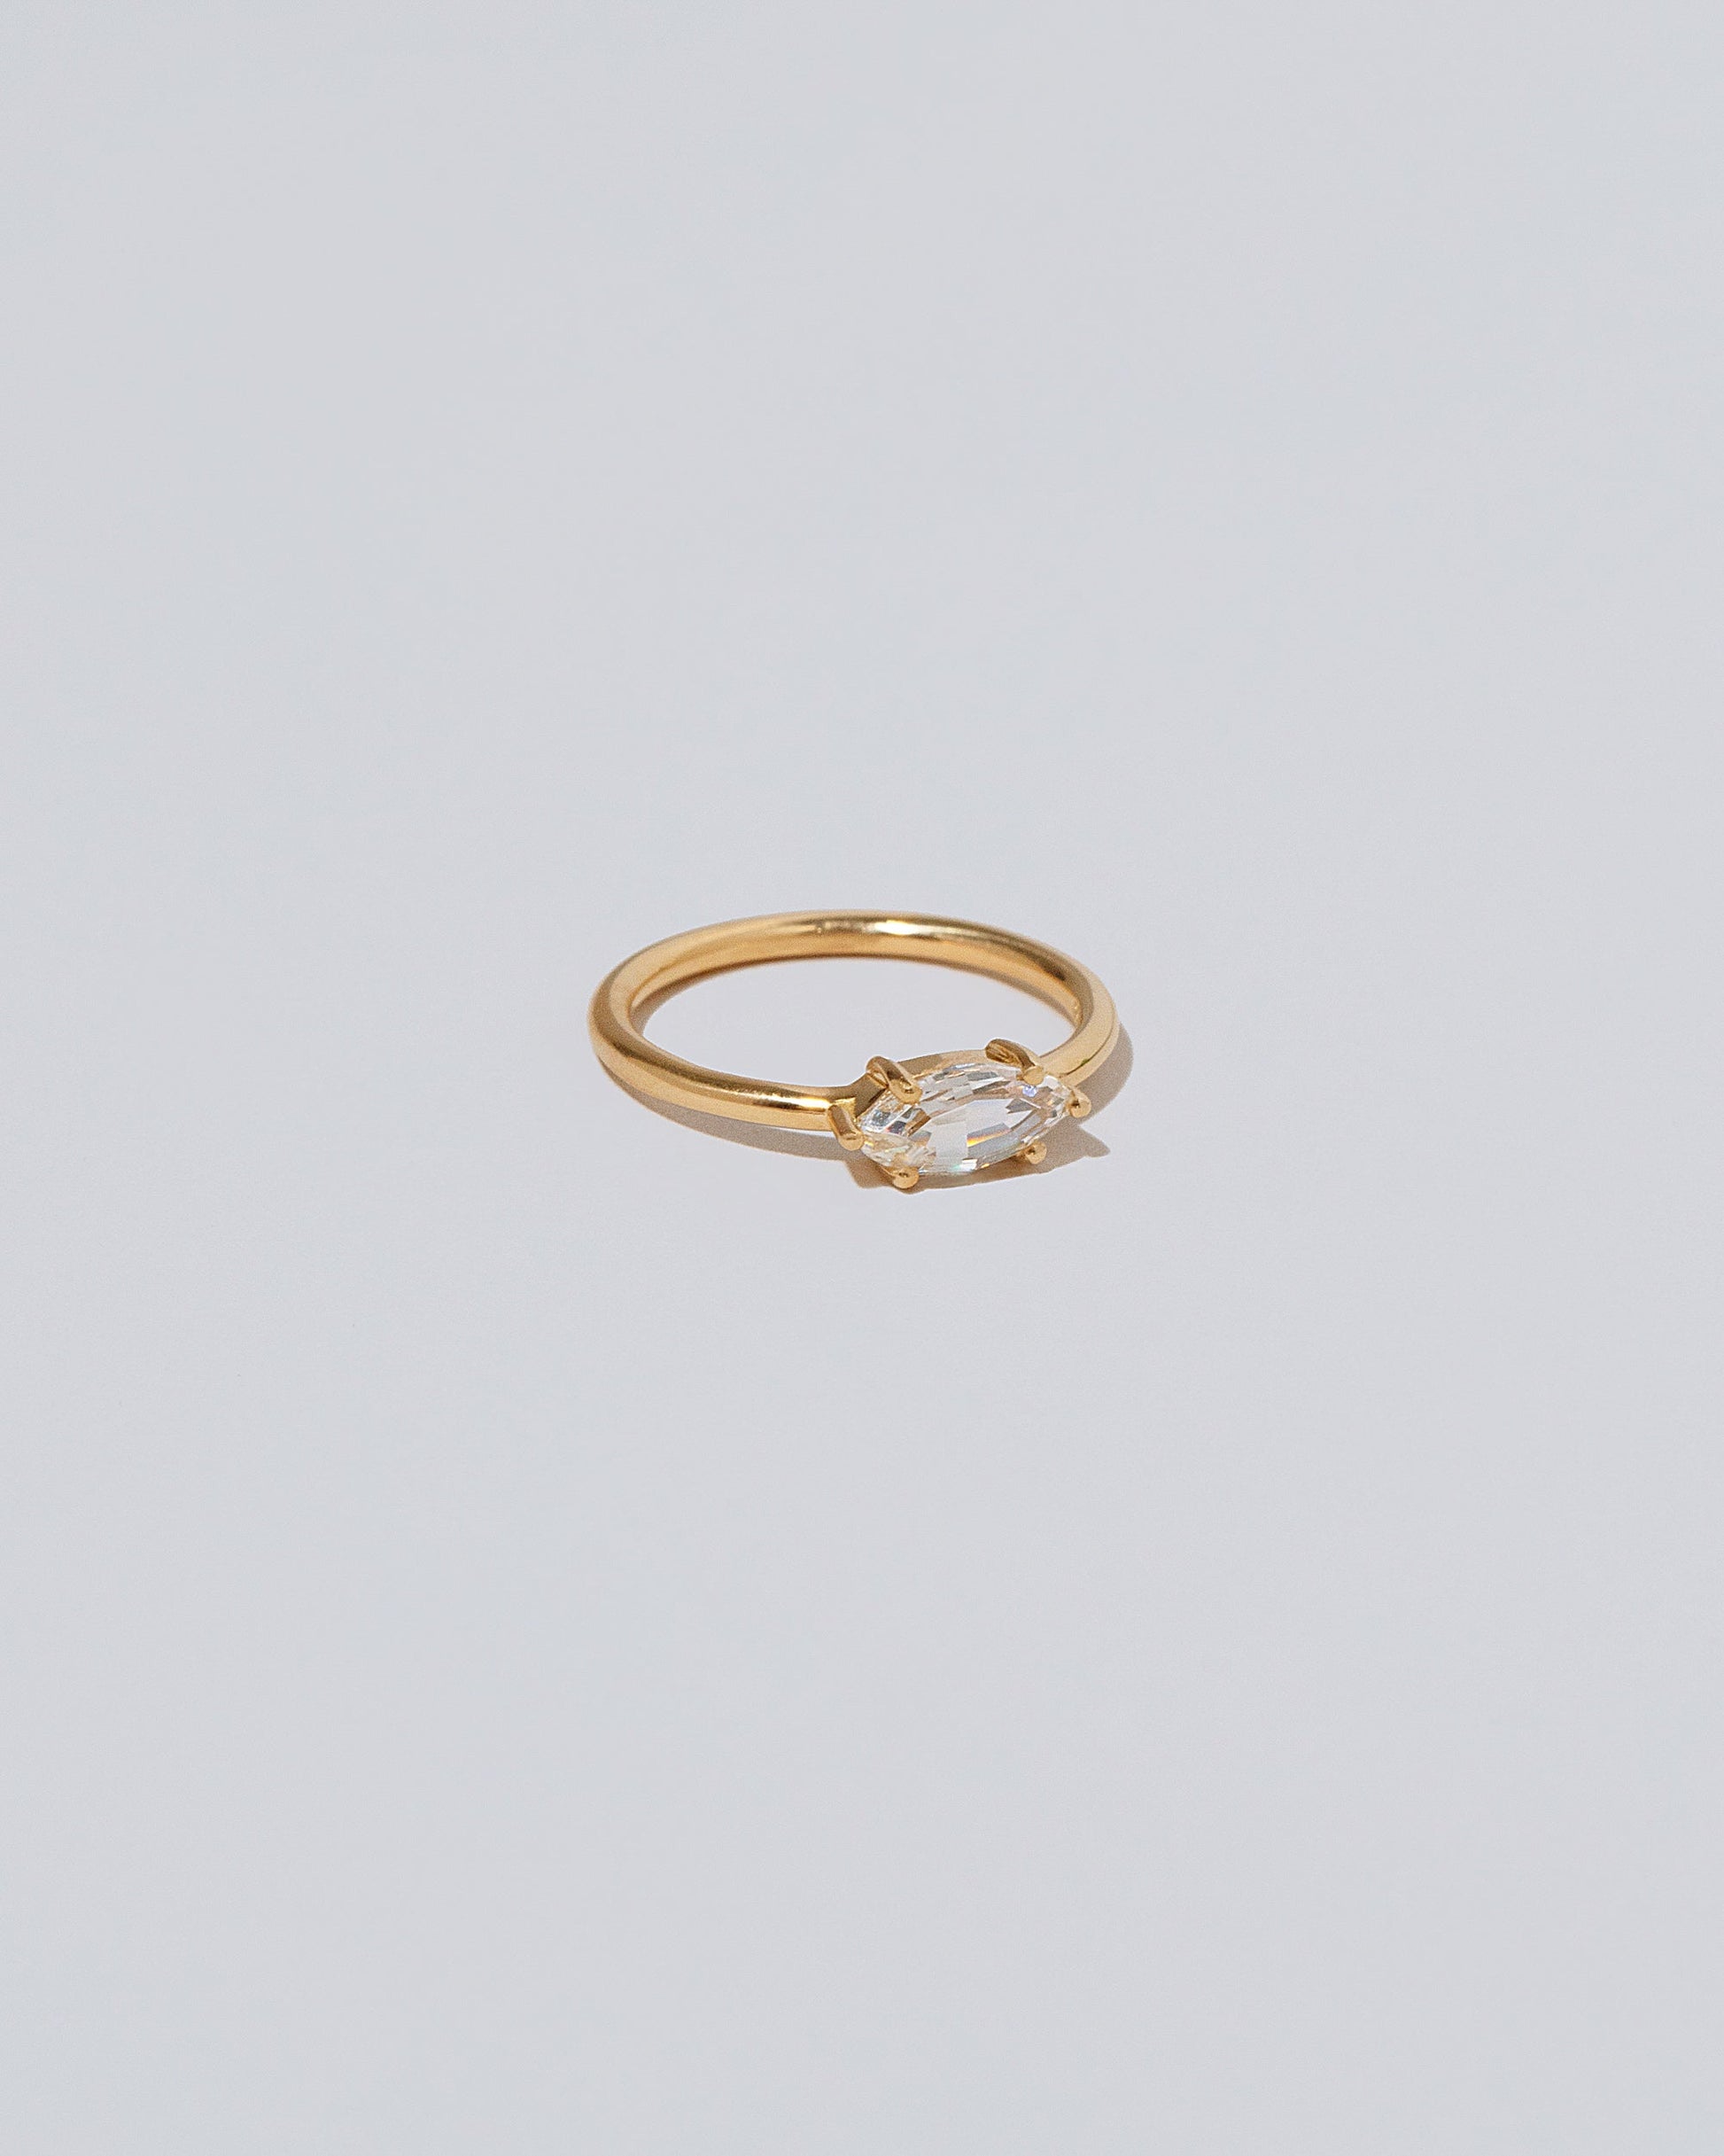 Product photo of the Ouvert Ring on light color background